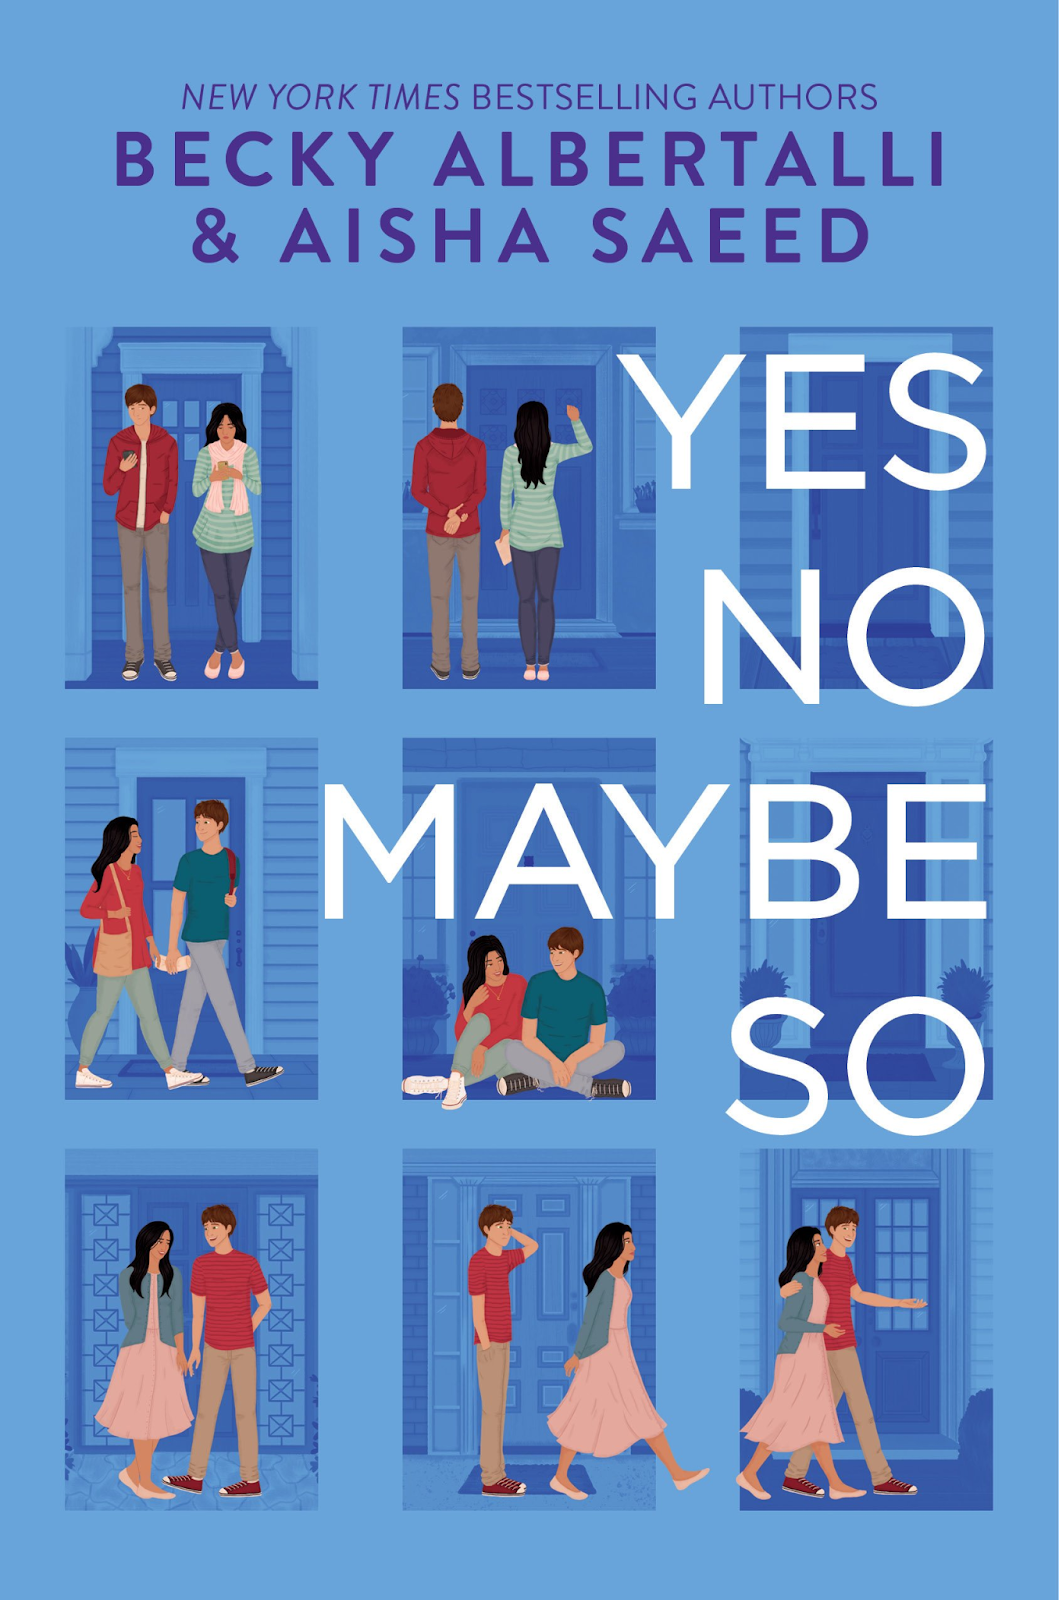 Yes No Maybe So by Becky Albertalli and Aisha Saeed book cover.